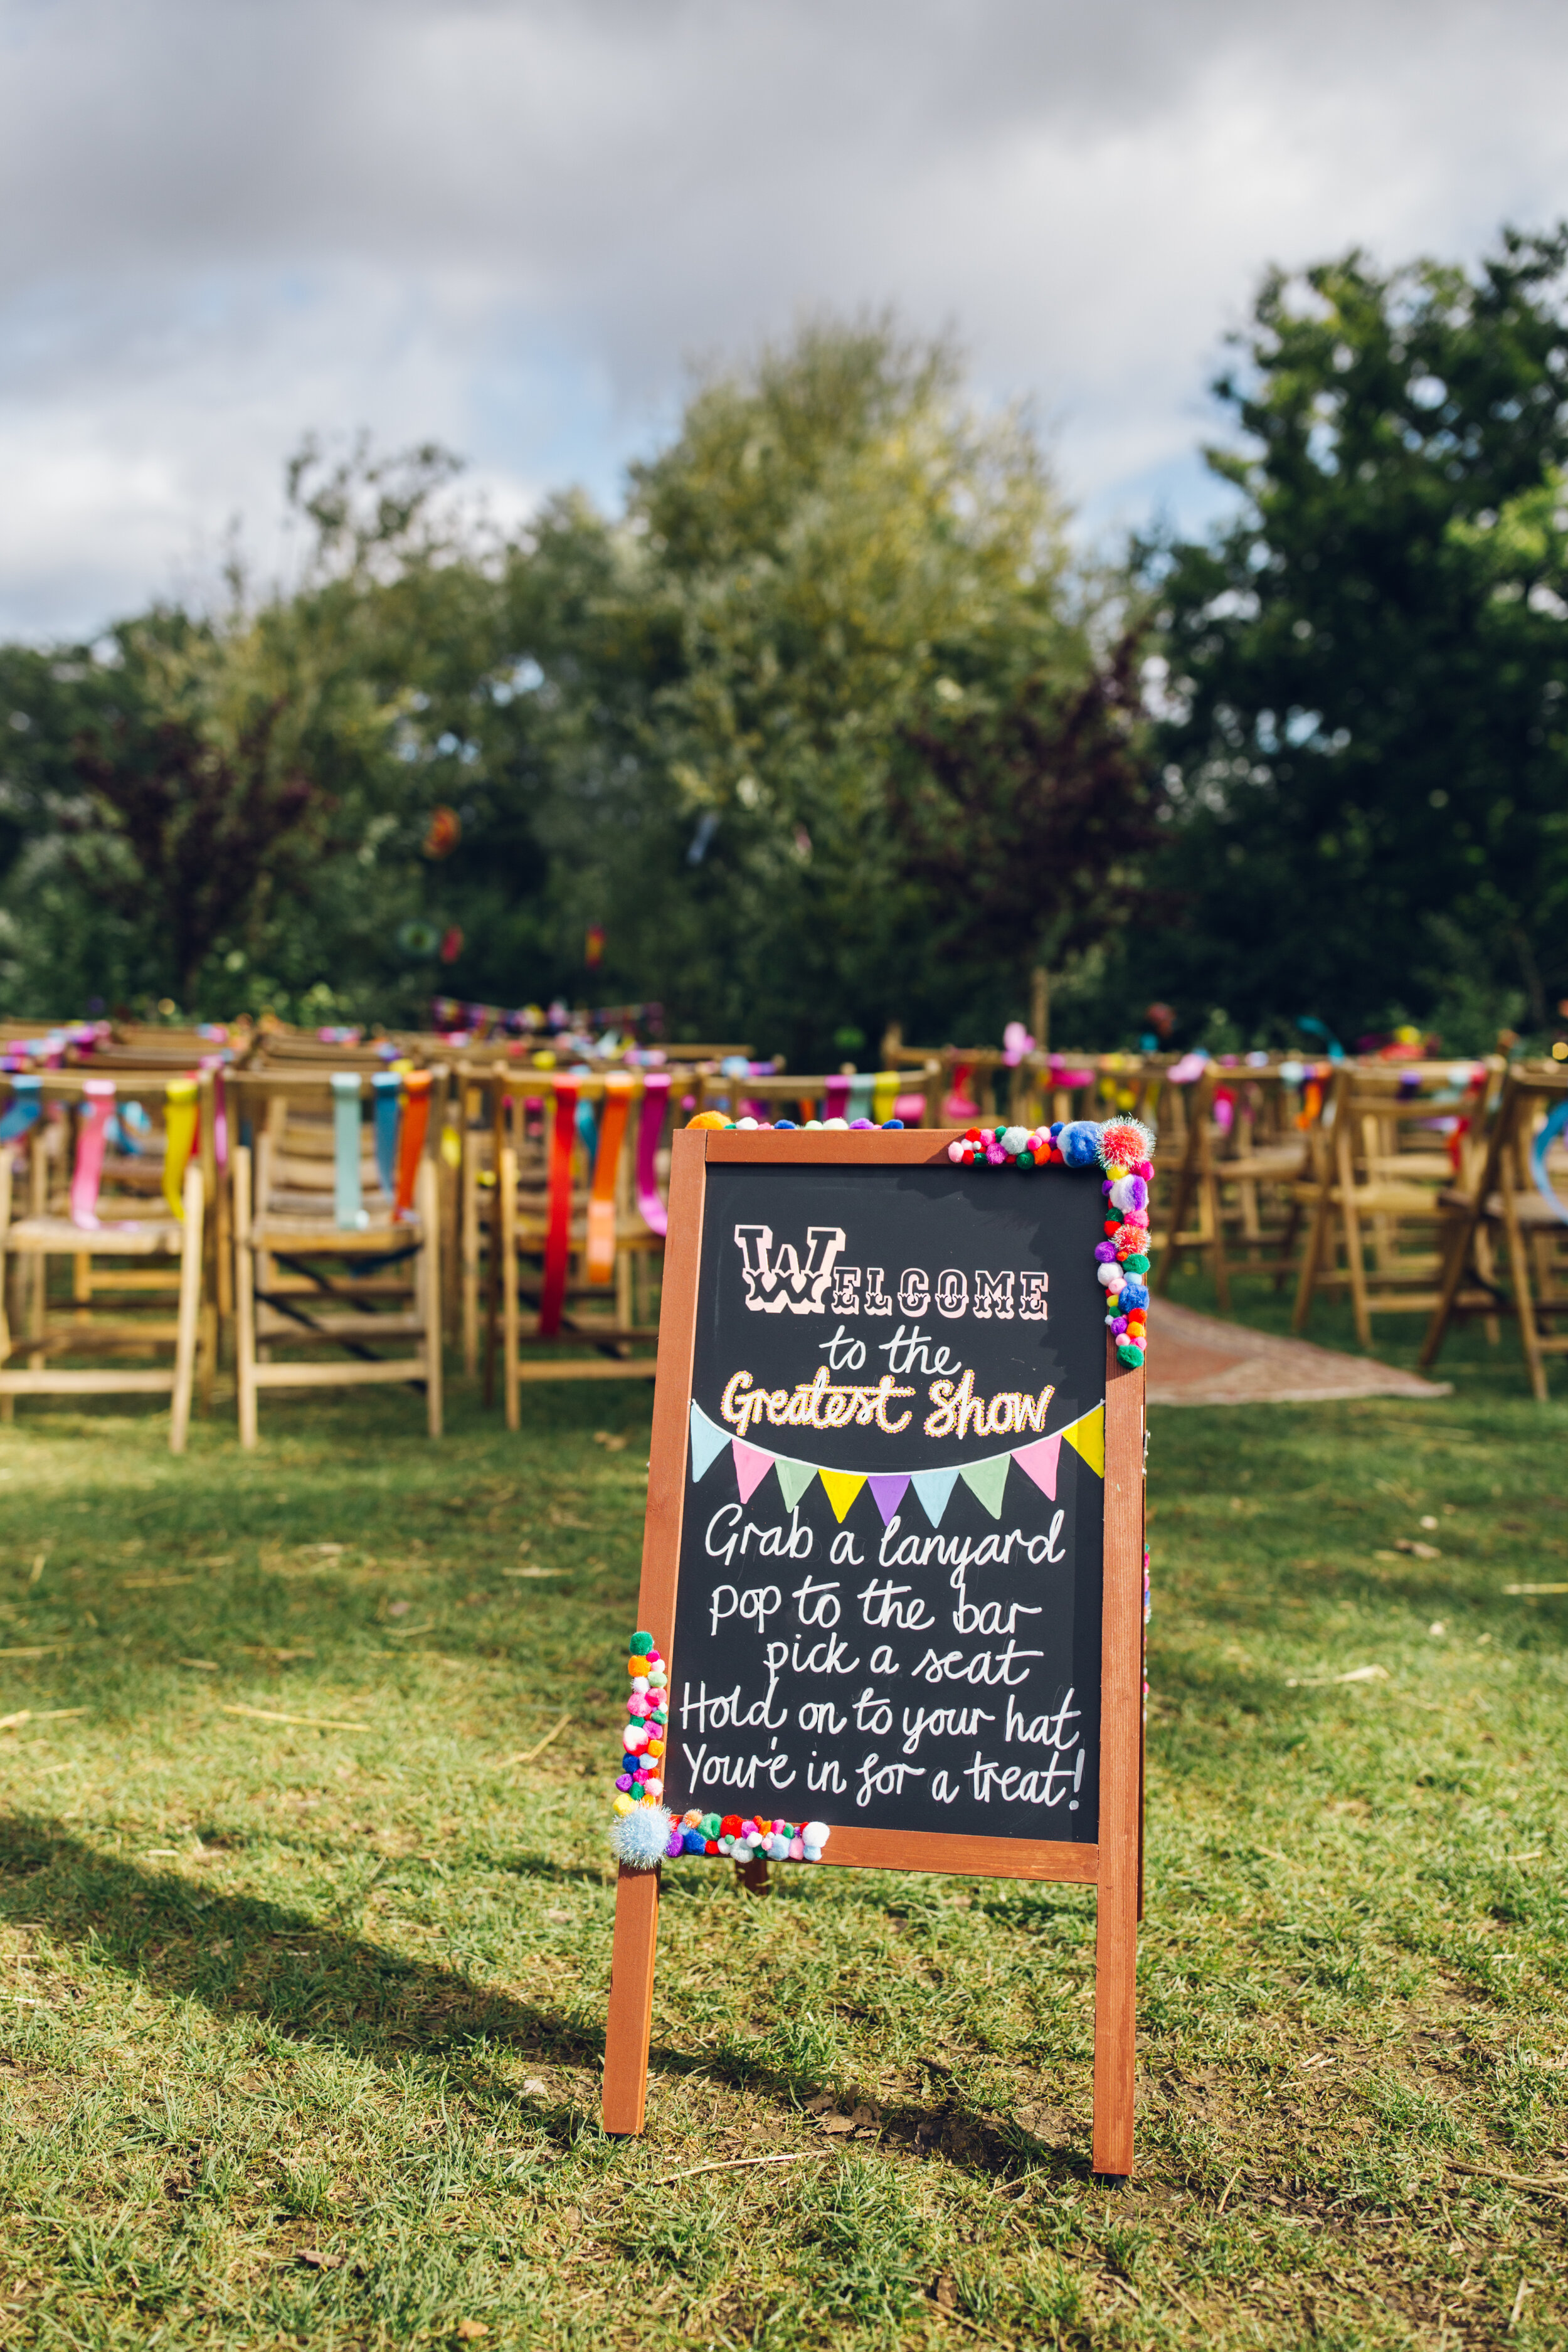 Greatest Show Welcome Sign Colourful Wedding Photography